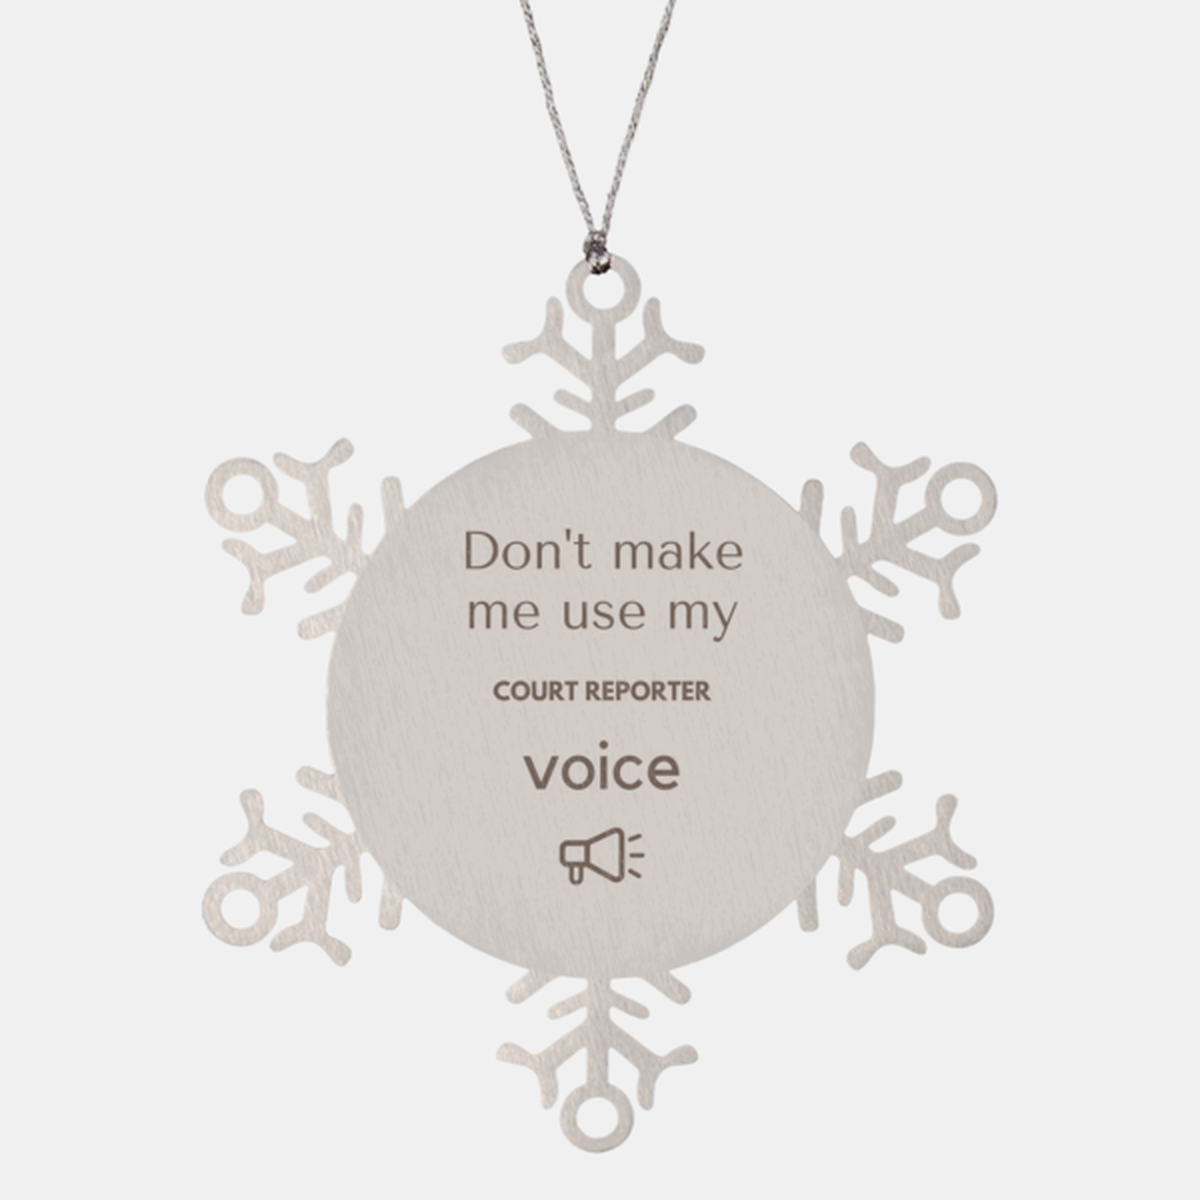 Don't make me use my Court Reporter voice, Sarcasm Court Reporter Ornament Gifts, Christmas Court Reporter Snowflake Ornament Unique Gifts For Court Reporter Coworkers, Men, Women, Colleague, Friends